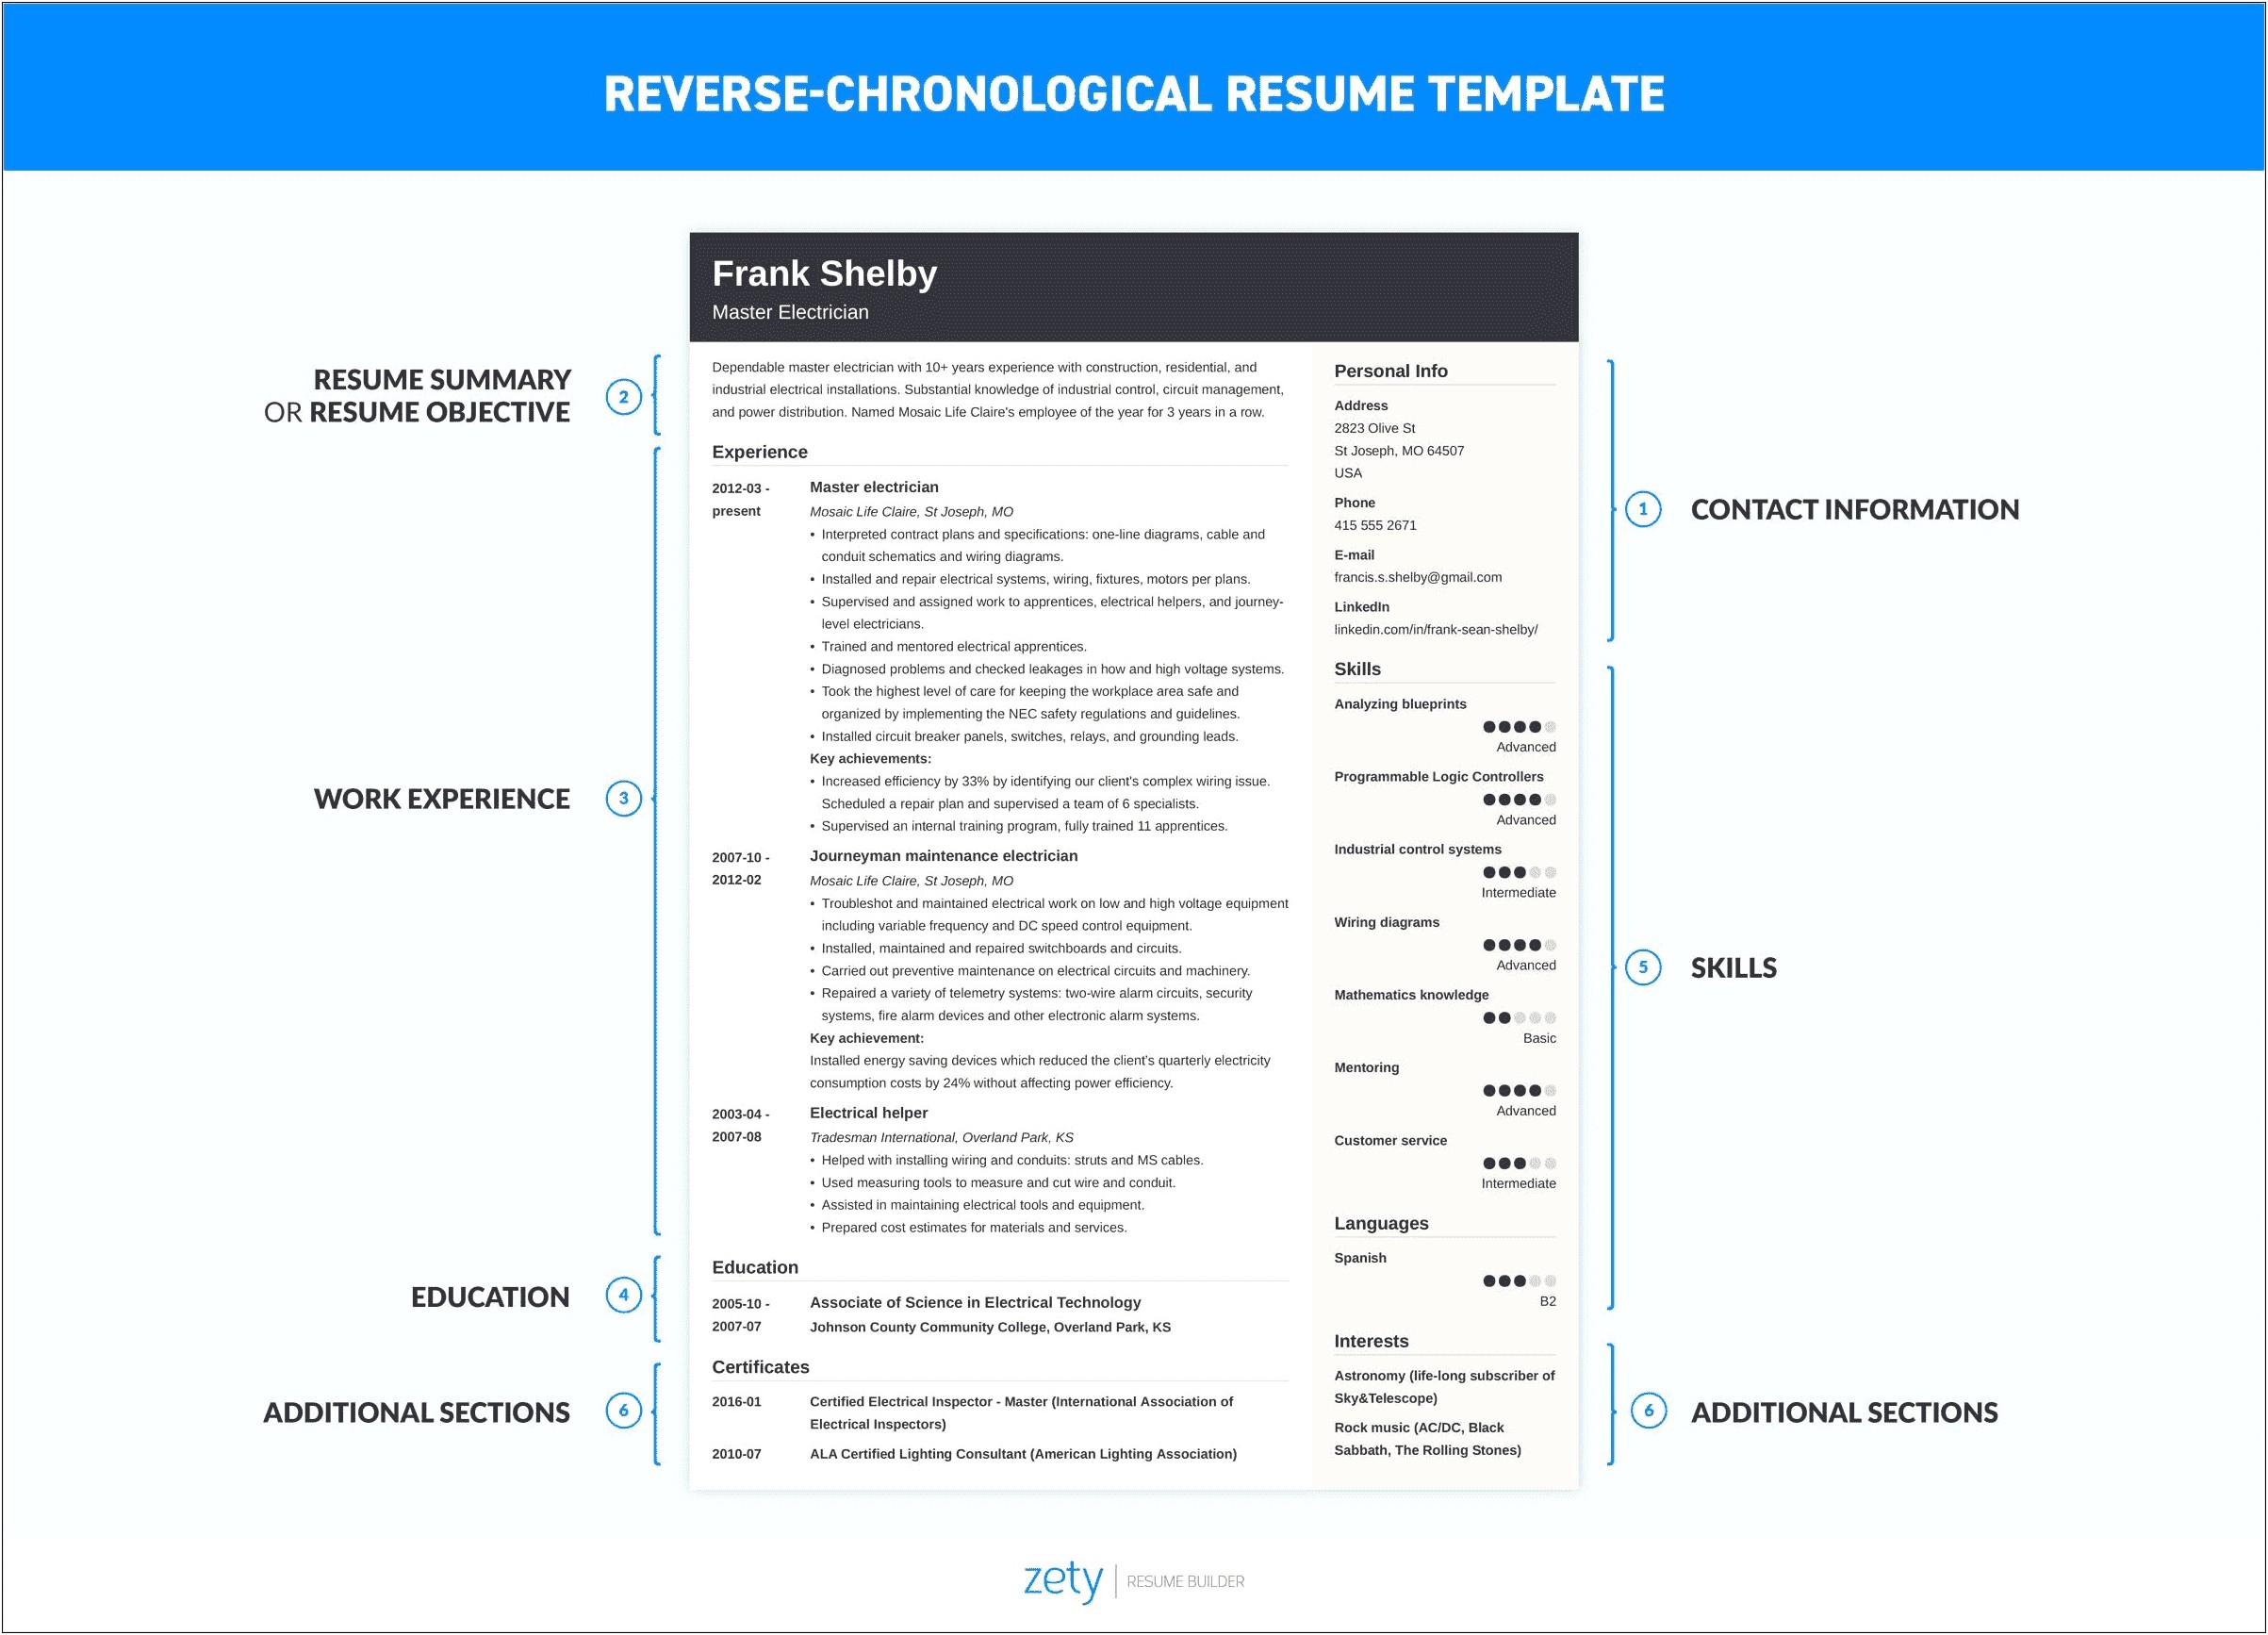 Best Ats Service To Test Resume